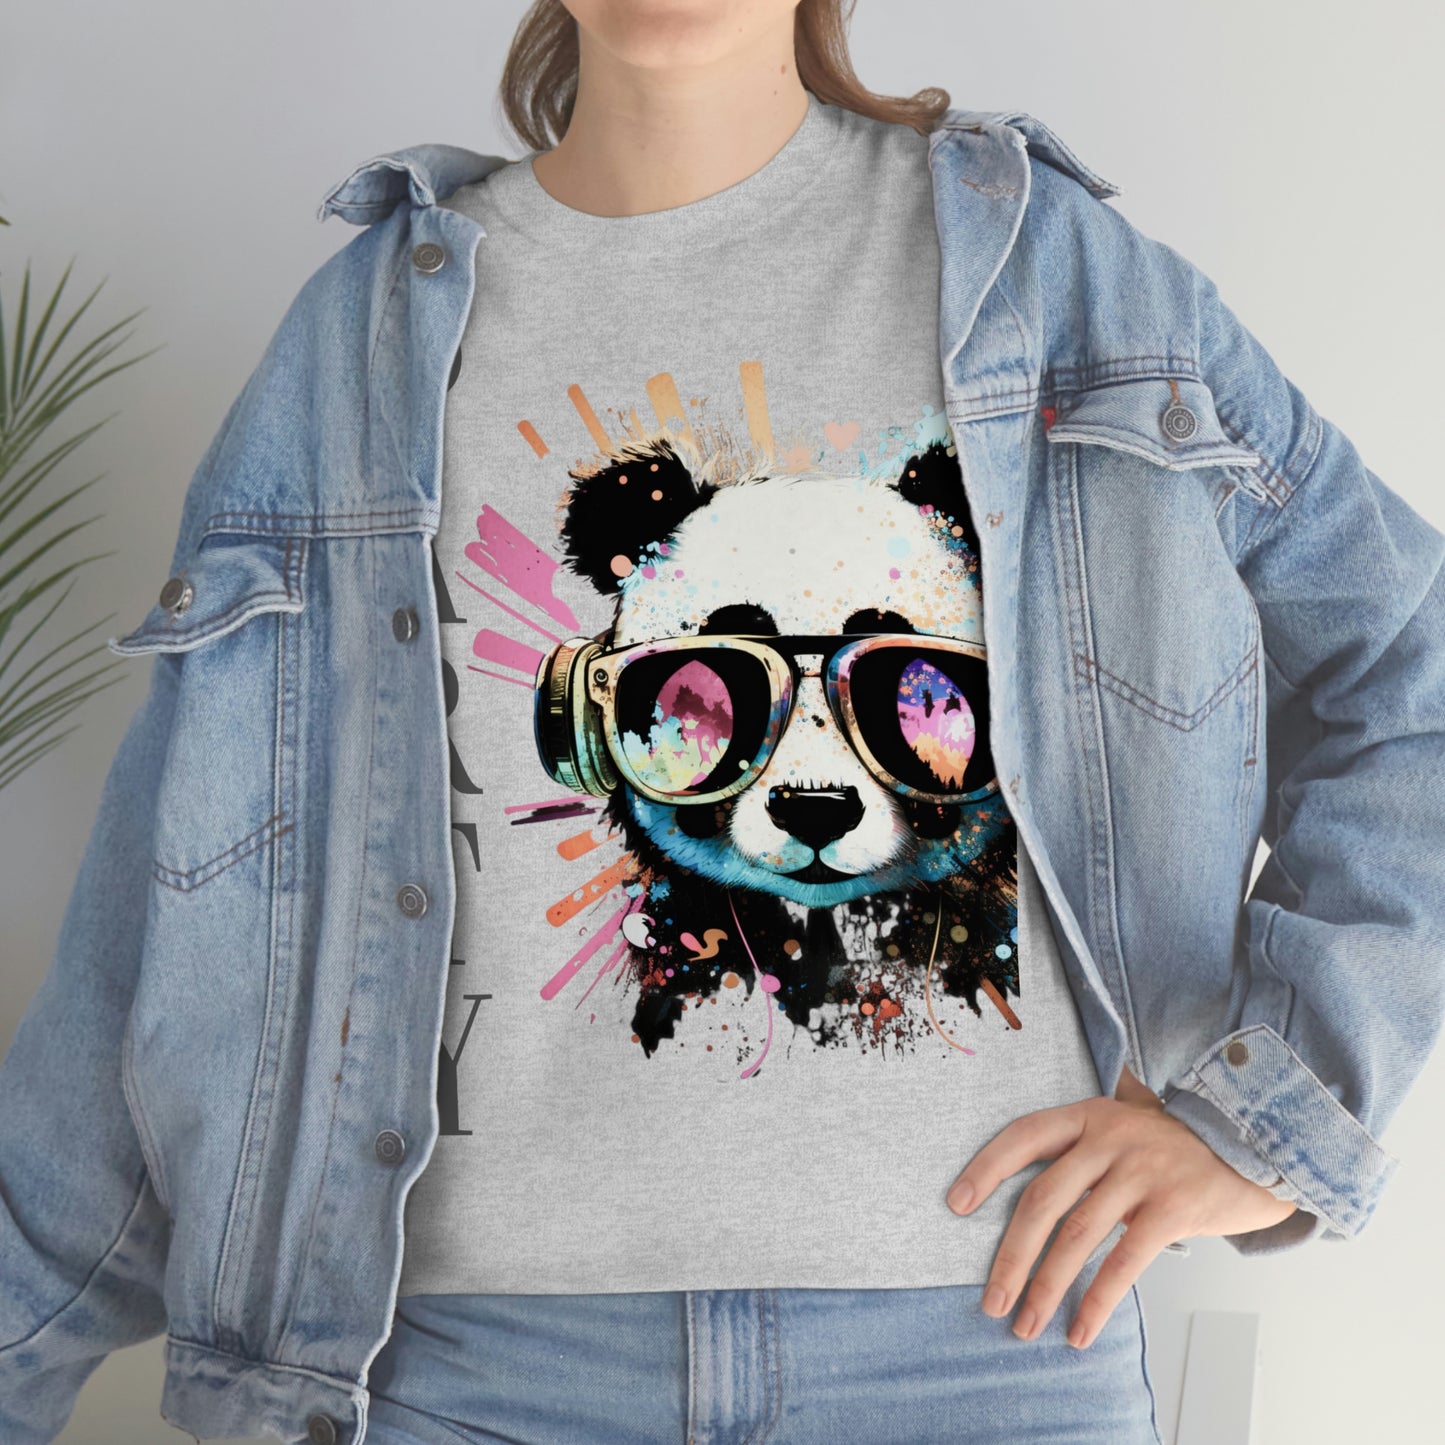 "Panda, Groove, Party!" - T-Shirt and Panda - Unisex Heavy Cotton Tee